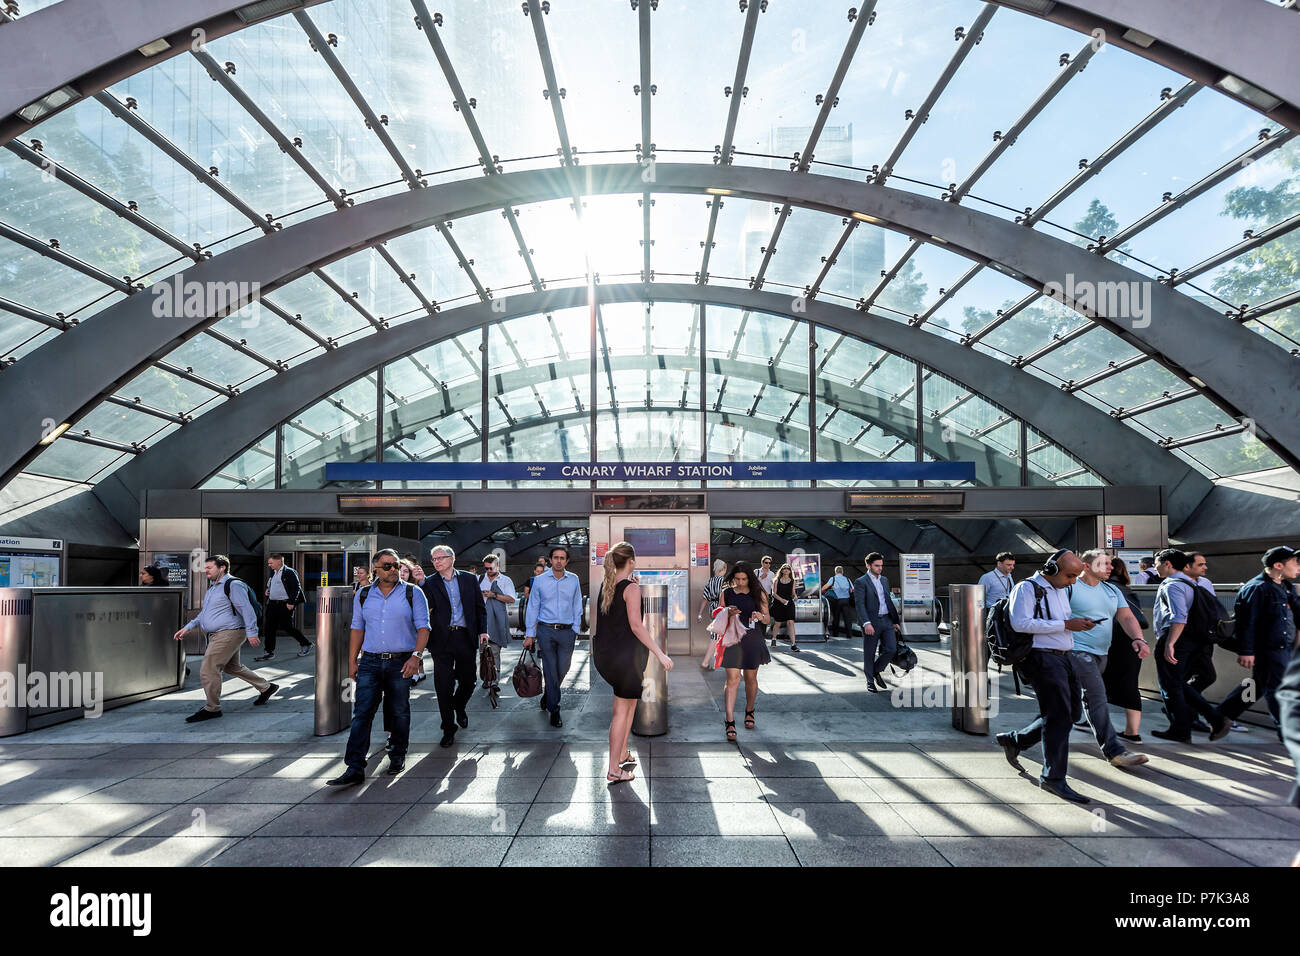 London, UK - June 26, 2018: People crowd commuters in front of outside Underground tube metro entrance during morning commute in Canary Wharf with mod Stock Photo